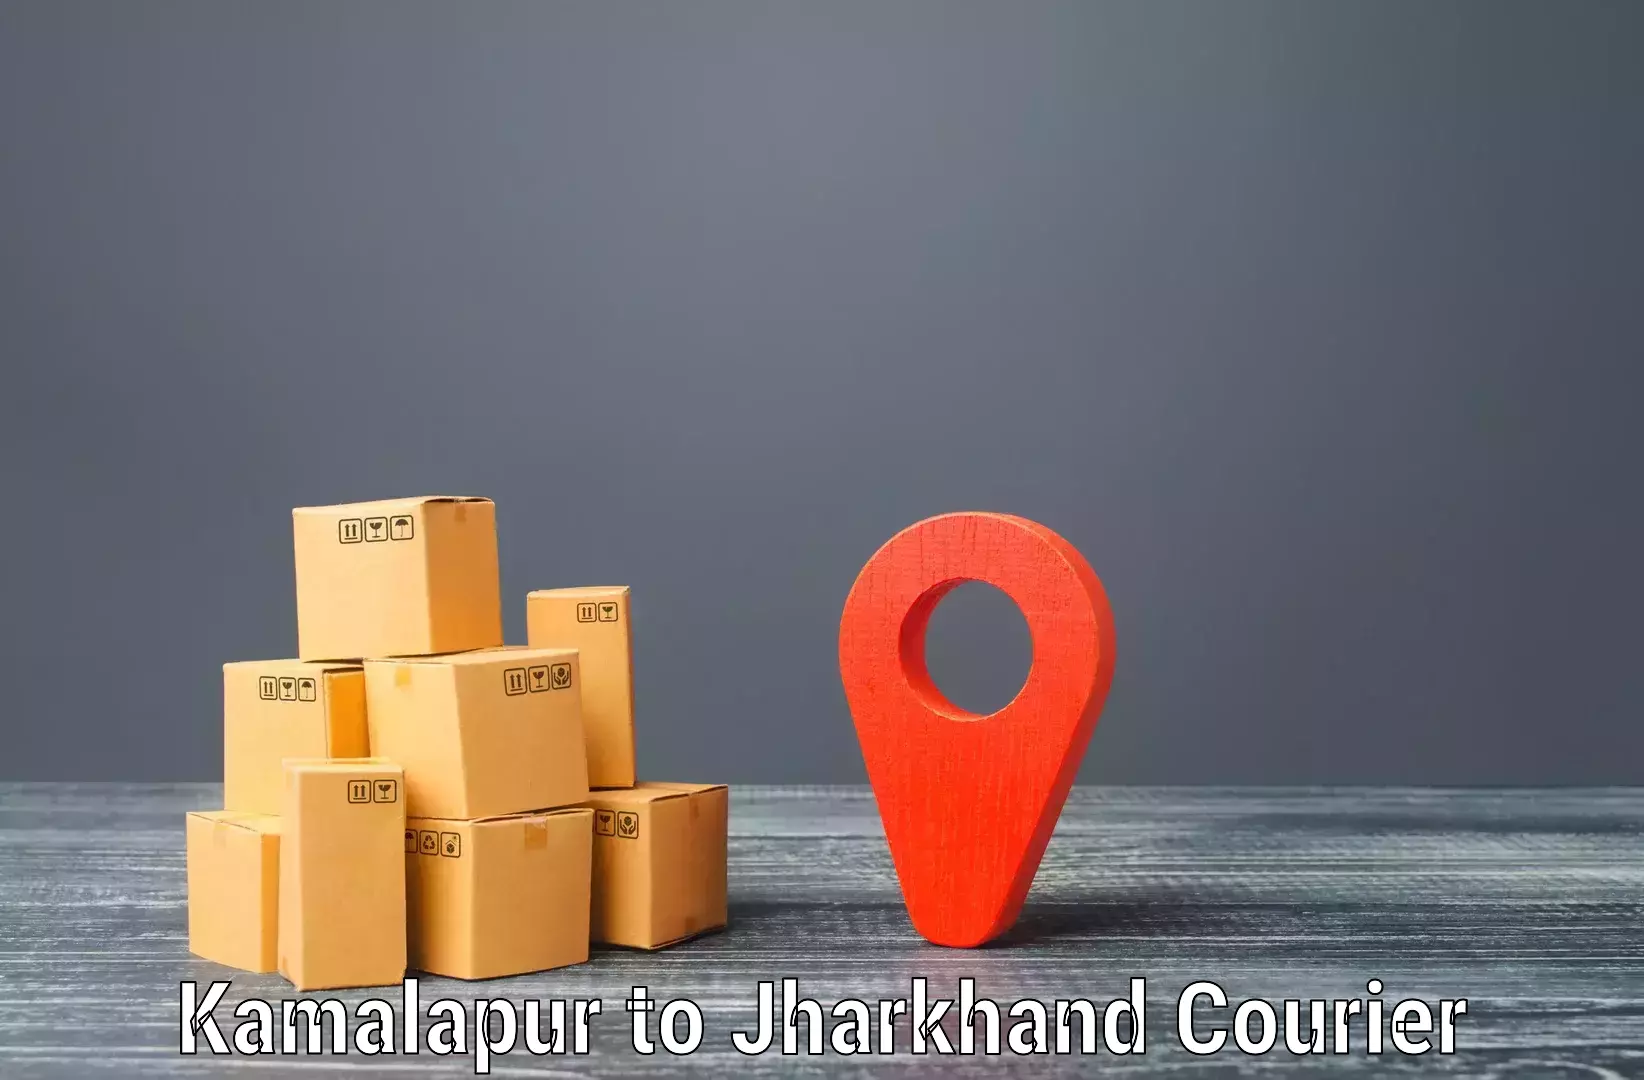 Secure freight services Kamalapur to Ranchi